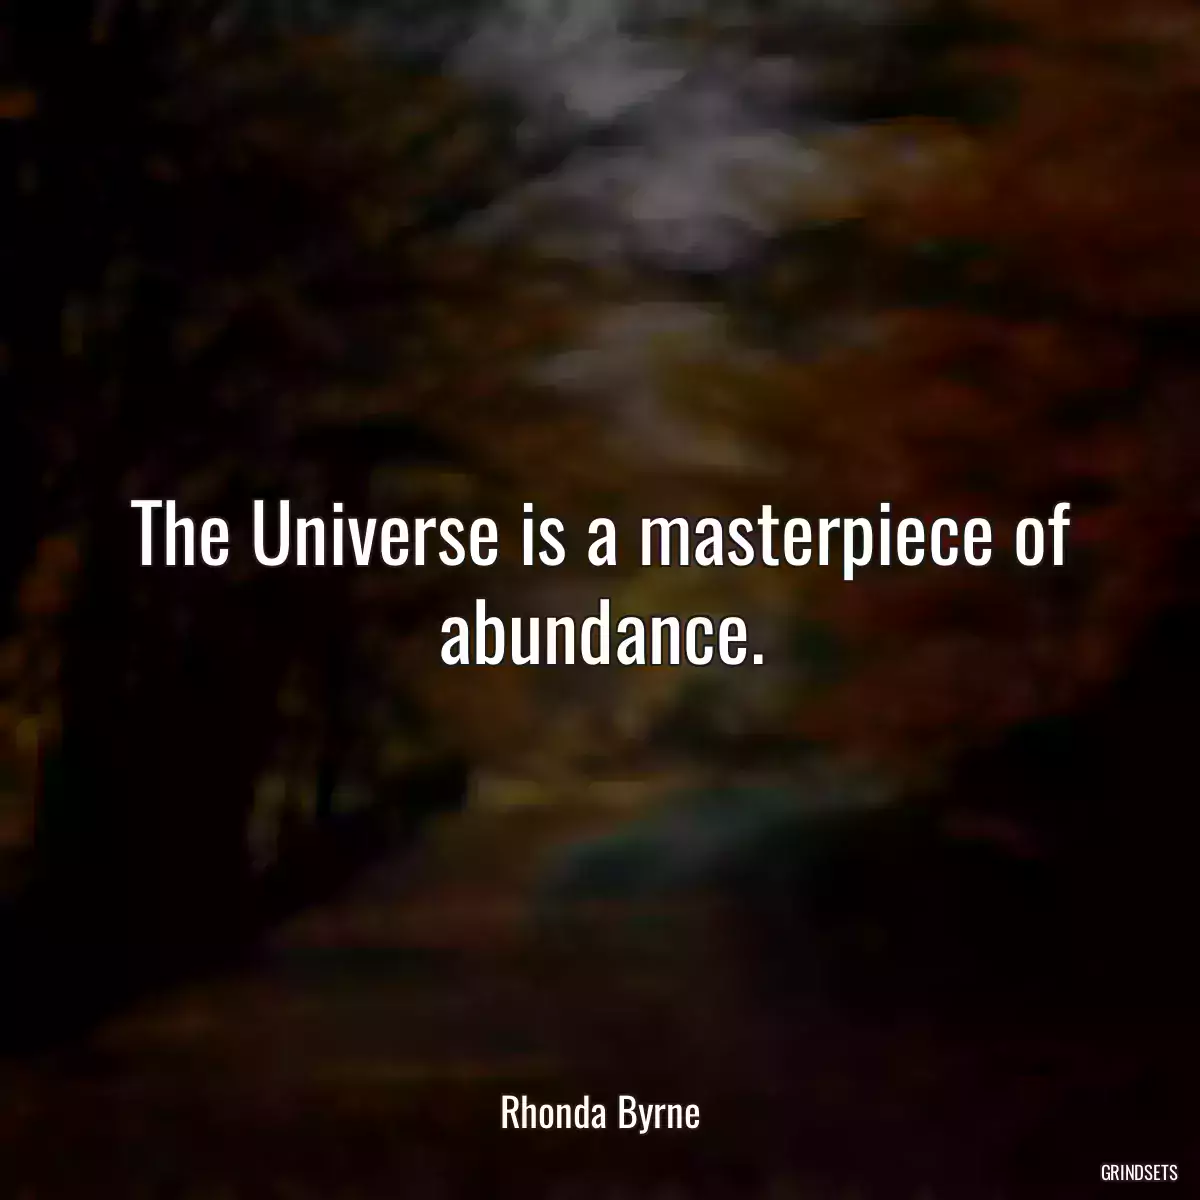 The Universe is a masterpiece of abundance.